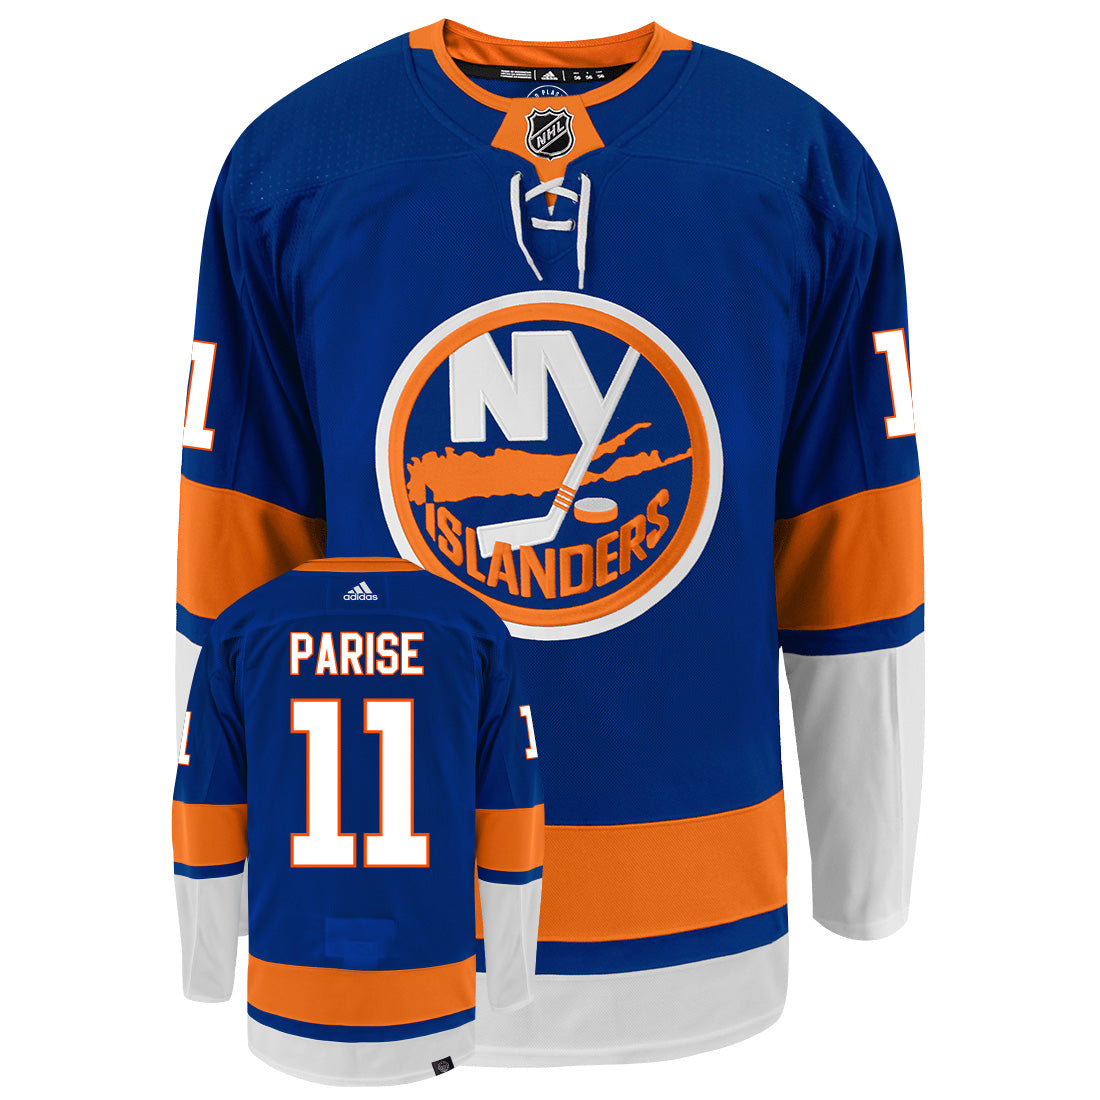 Zach Parise New York Islanders Adidas Primegreen Authentic NHL Hockey Jersey - Front/Back View